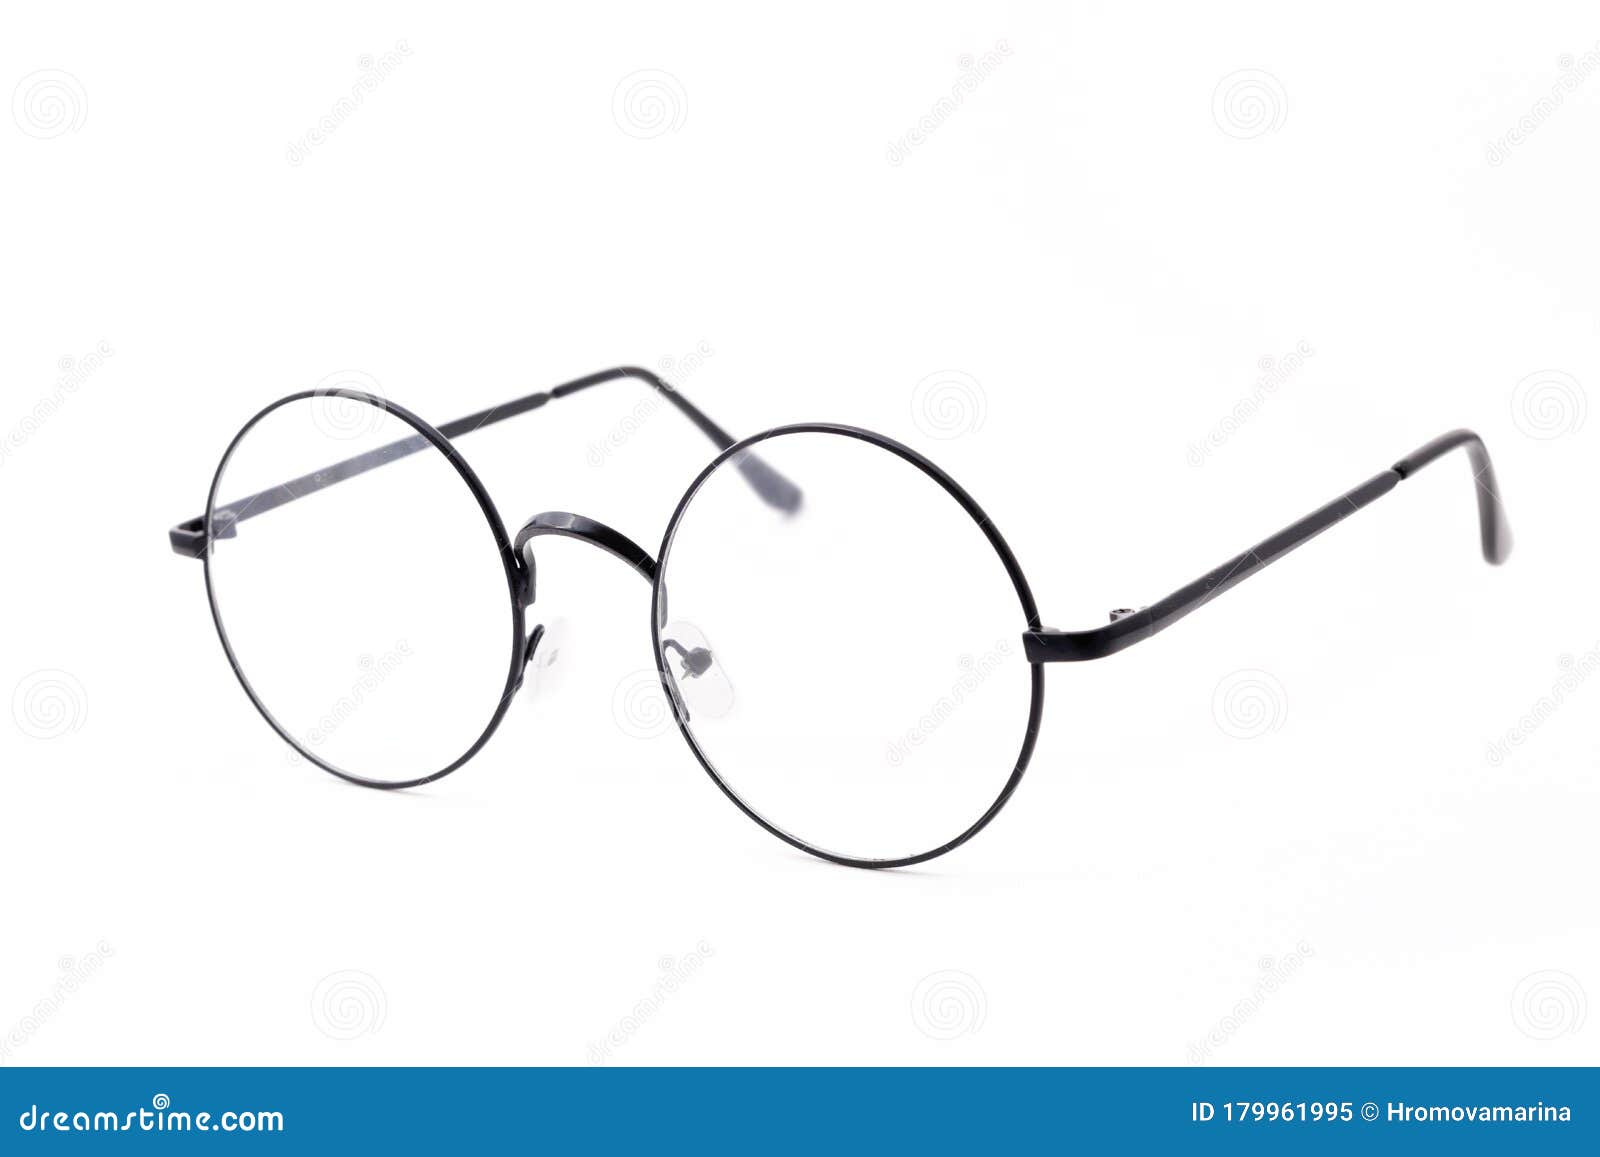 round black-rimmed glasses are view from above.  on a light background.